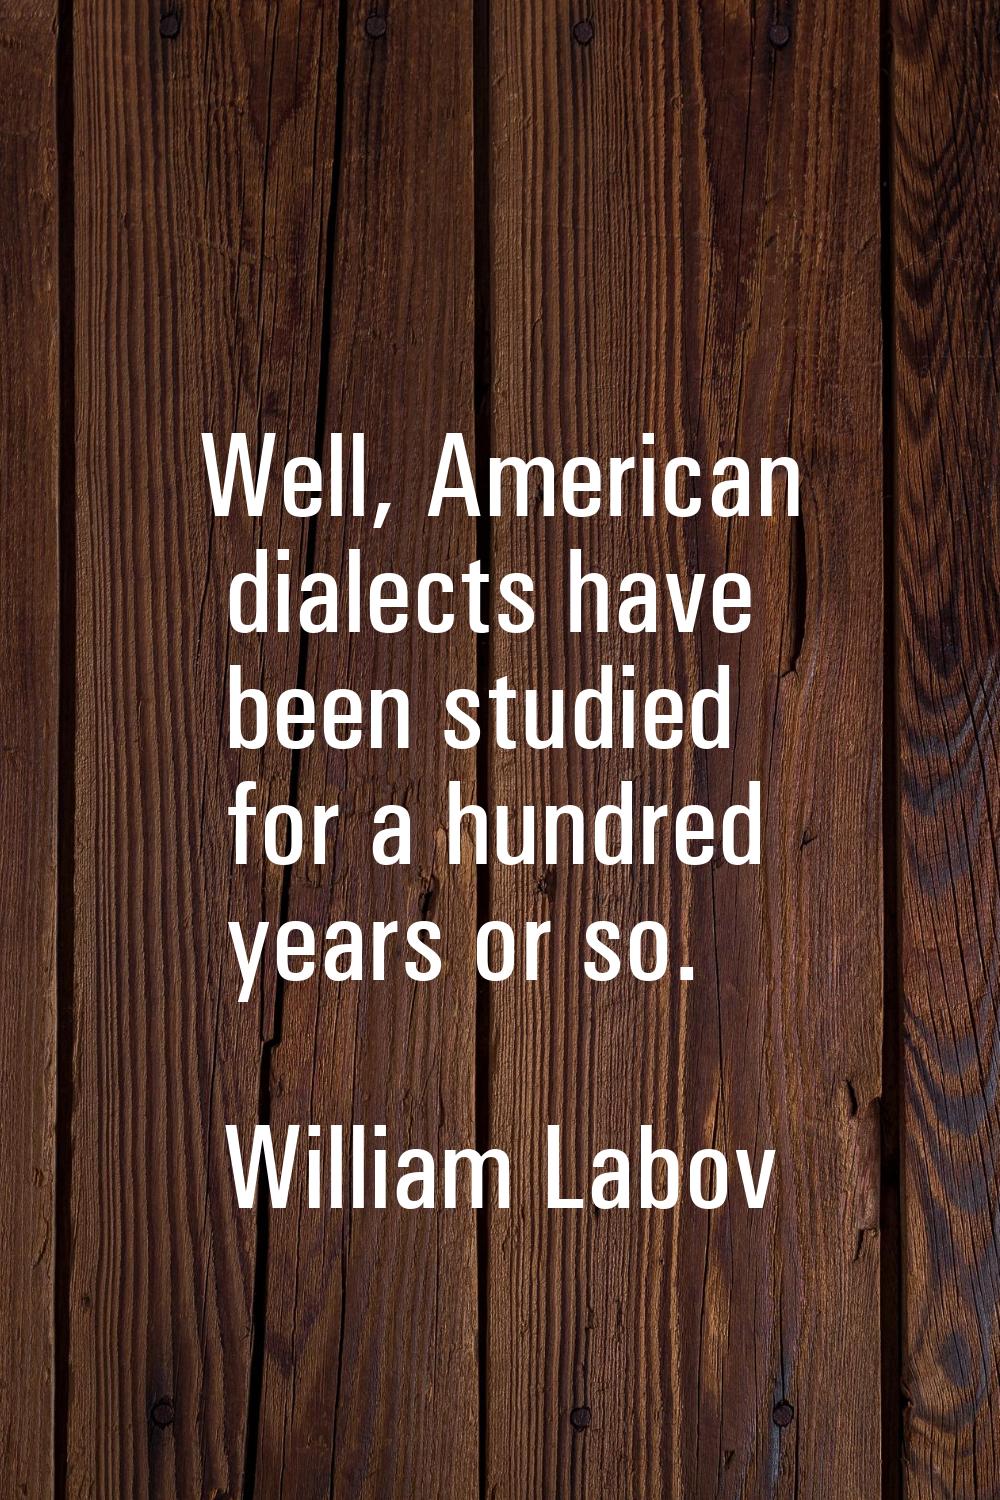 Well, American dialects have been studied for a hundred years or so.